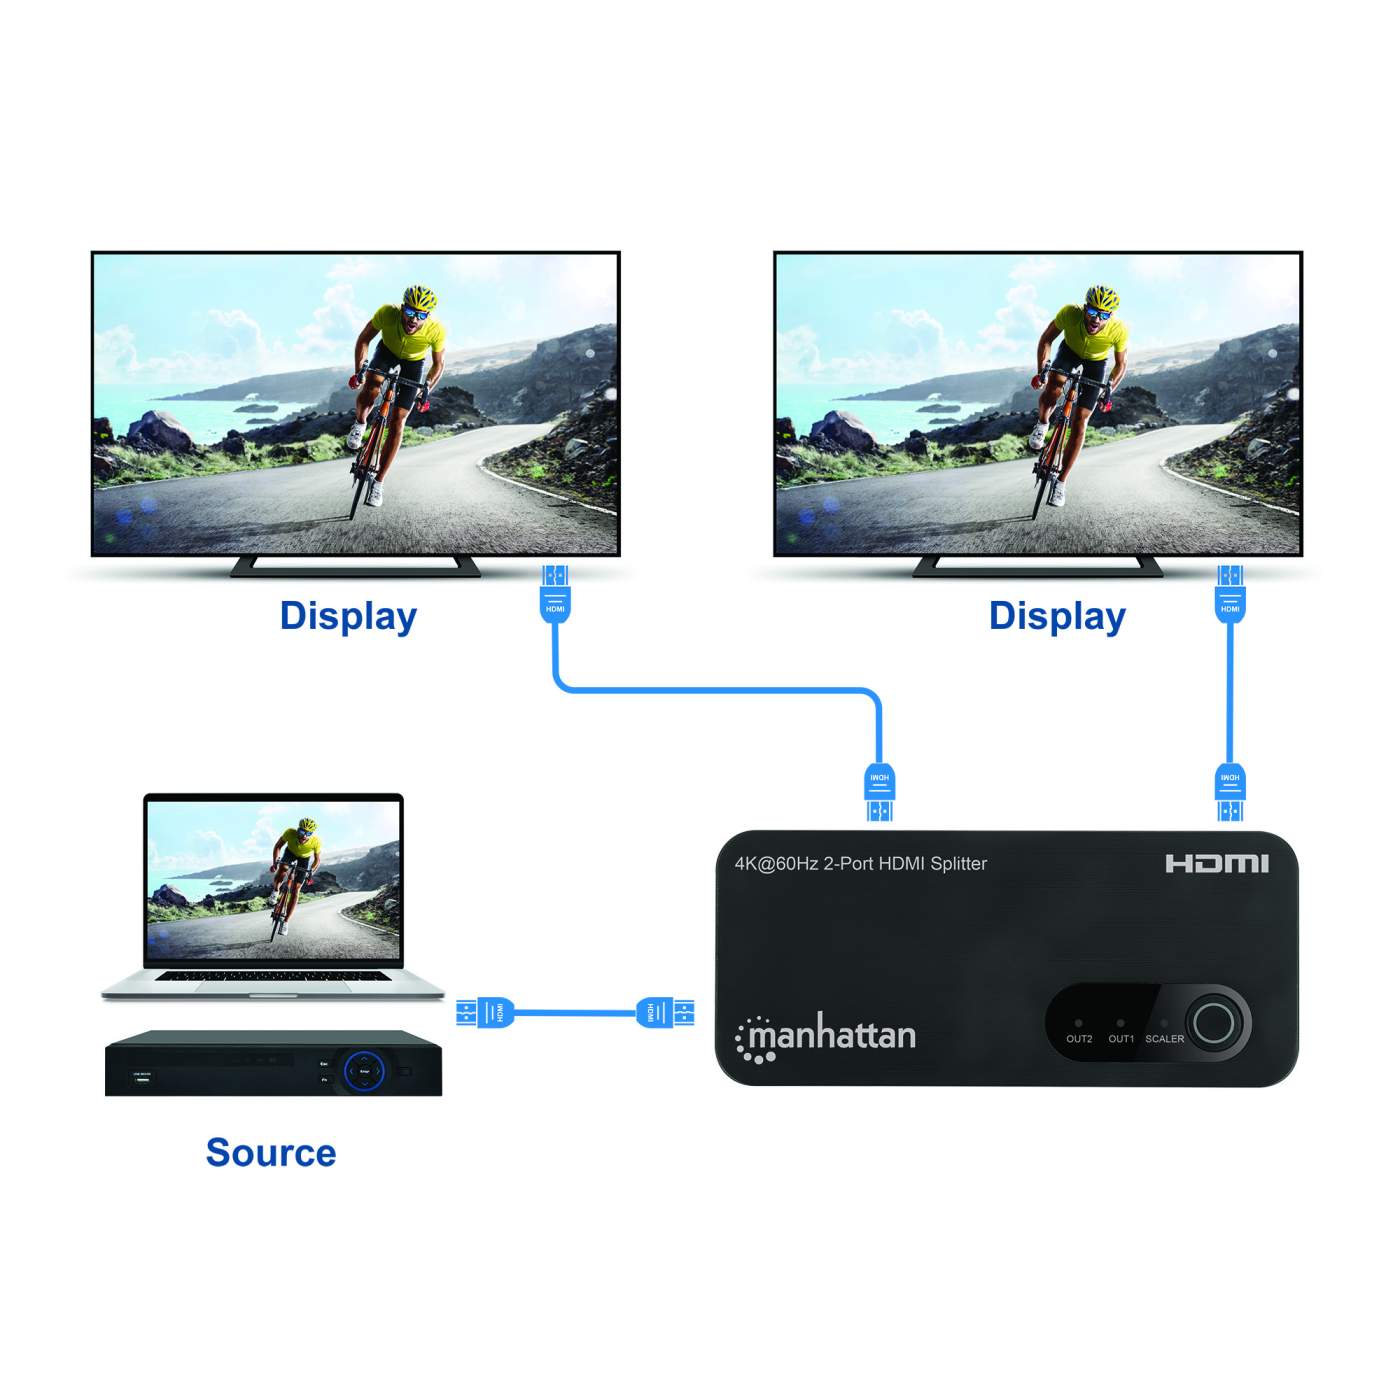 4K@60Hz 2-Port HDMI Splitter with Downscaling Image 10